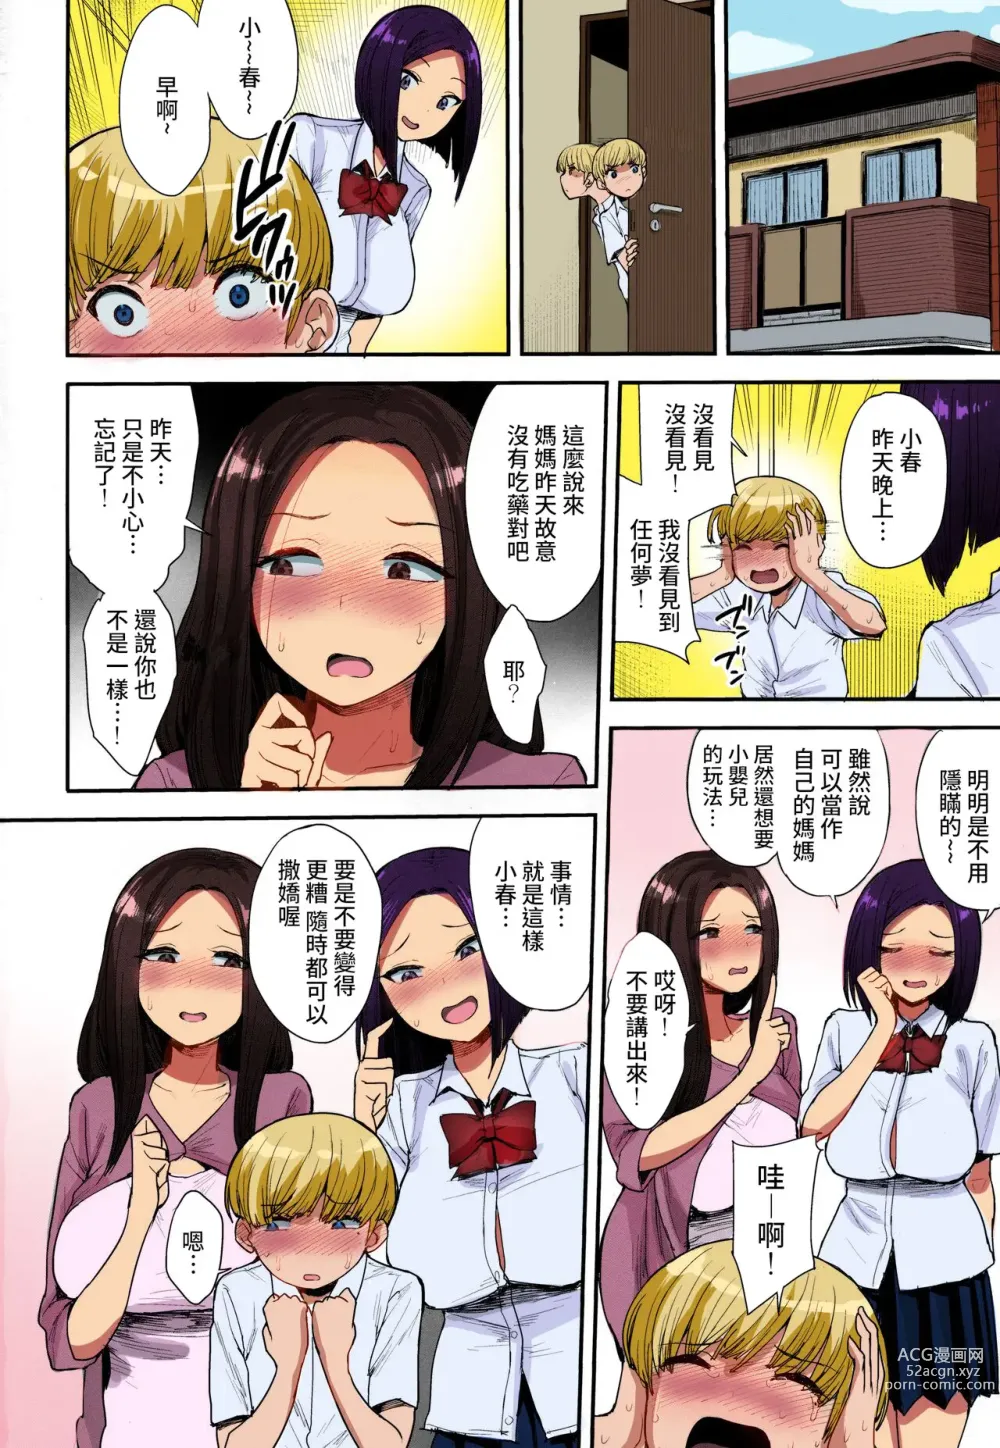 Page 29 of doujinshi 魅魔鄰居 (decensored)